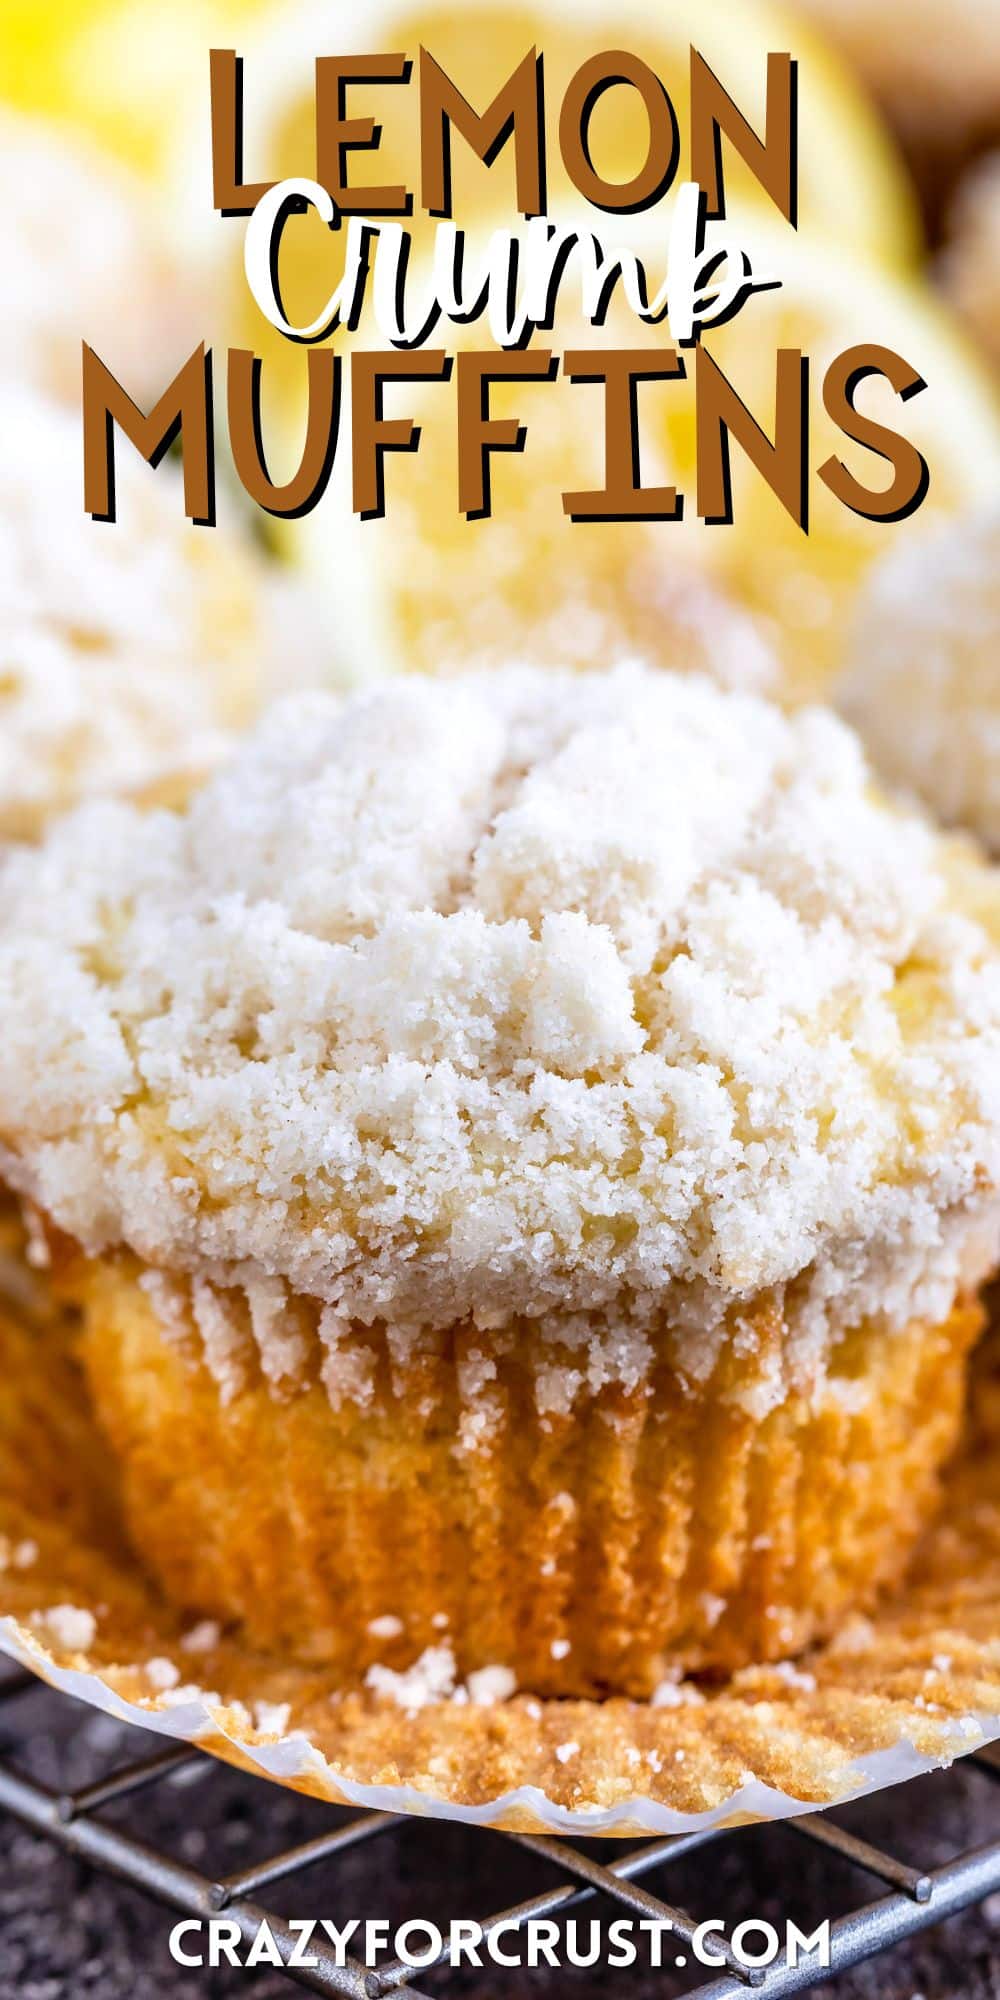 lemon muffins topped with a white crumb topping and lemons in the background with words on the image.